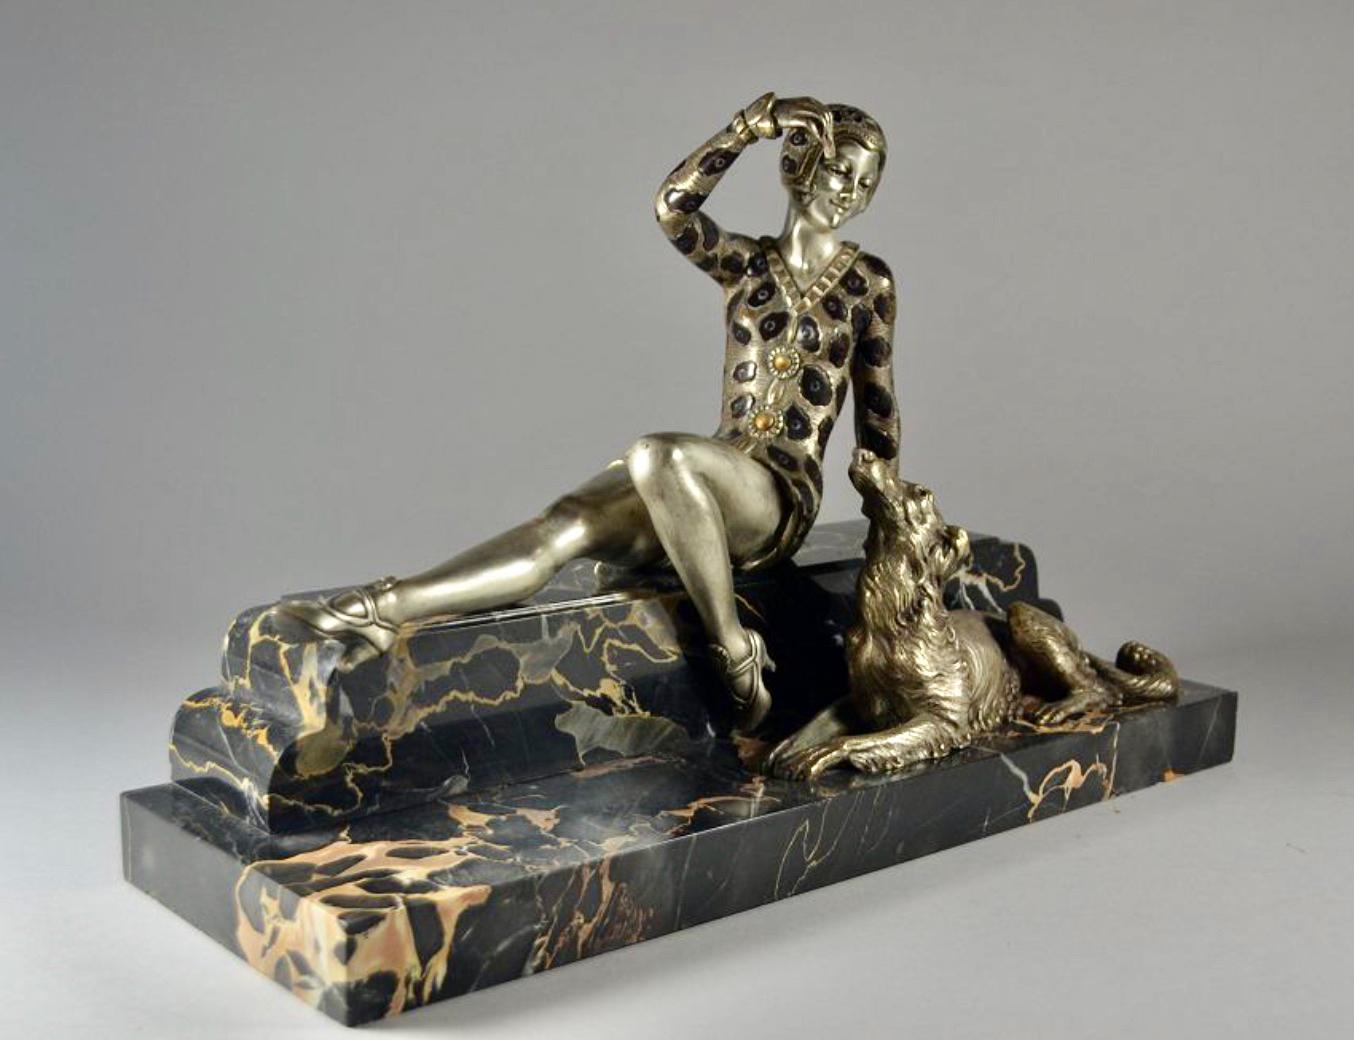 Art Deco bronze statue of woman & borzoi dog by Charles Henri Molins. Quality sculpture in silvered bronze and enamel on a portoro marble base (also signed on the base). This 1930 statue is emblematic of the Art Deco period. In the woman’s stylized